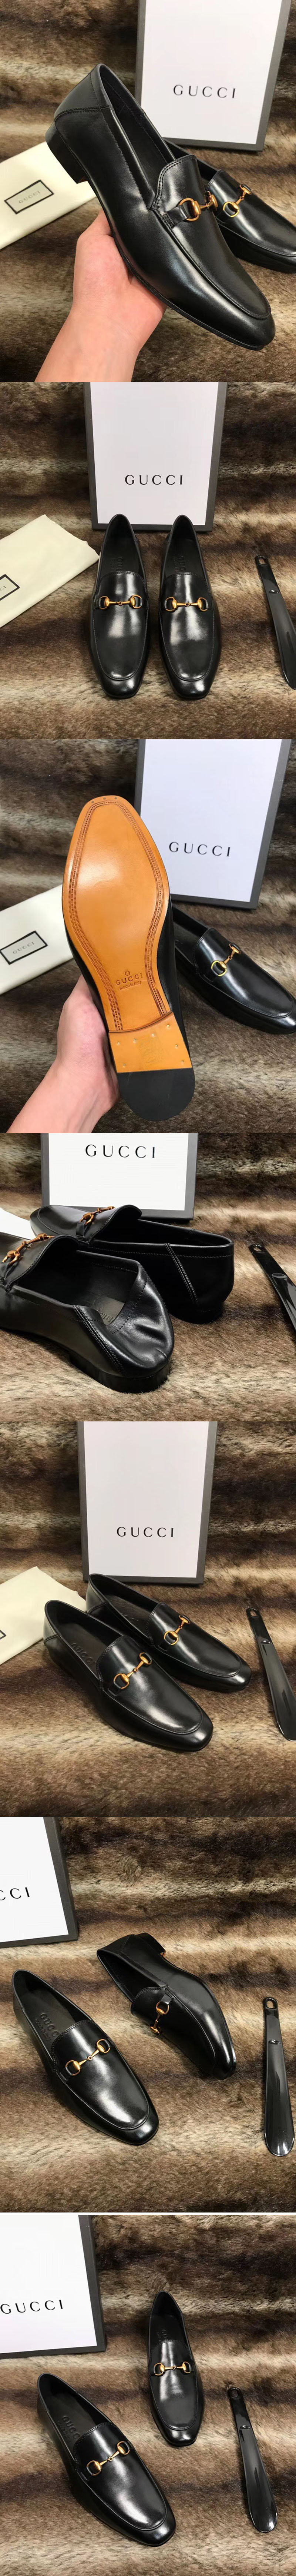 Replica Gucci 526297 Horsebit Leather loafer And Shoes Black Calf Leather